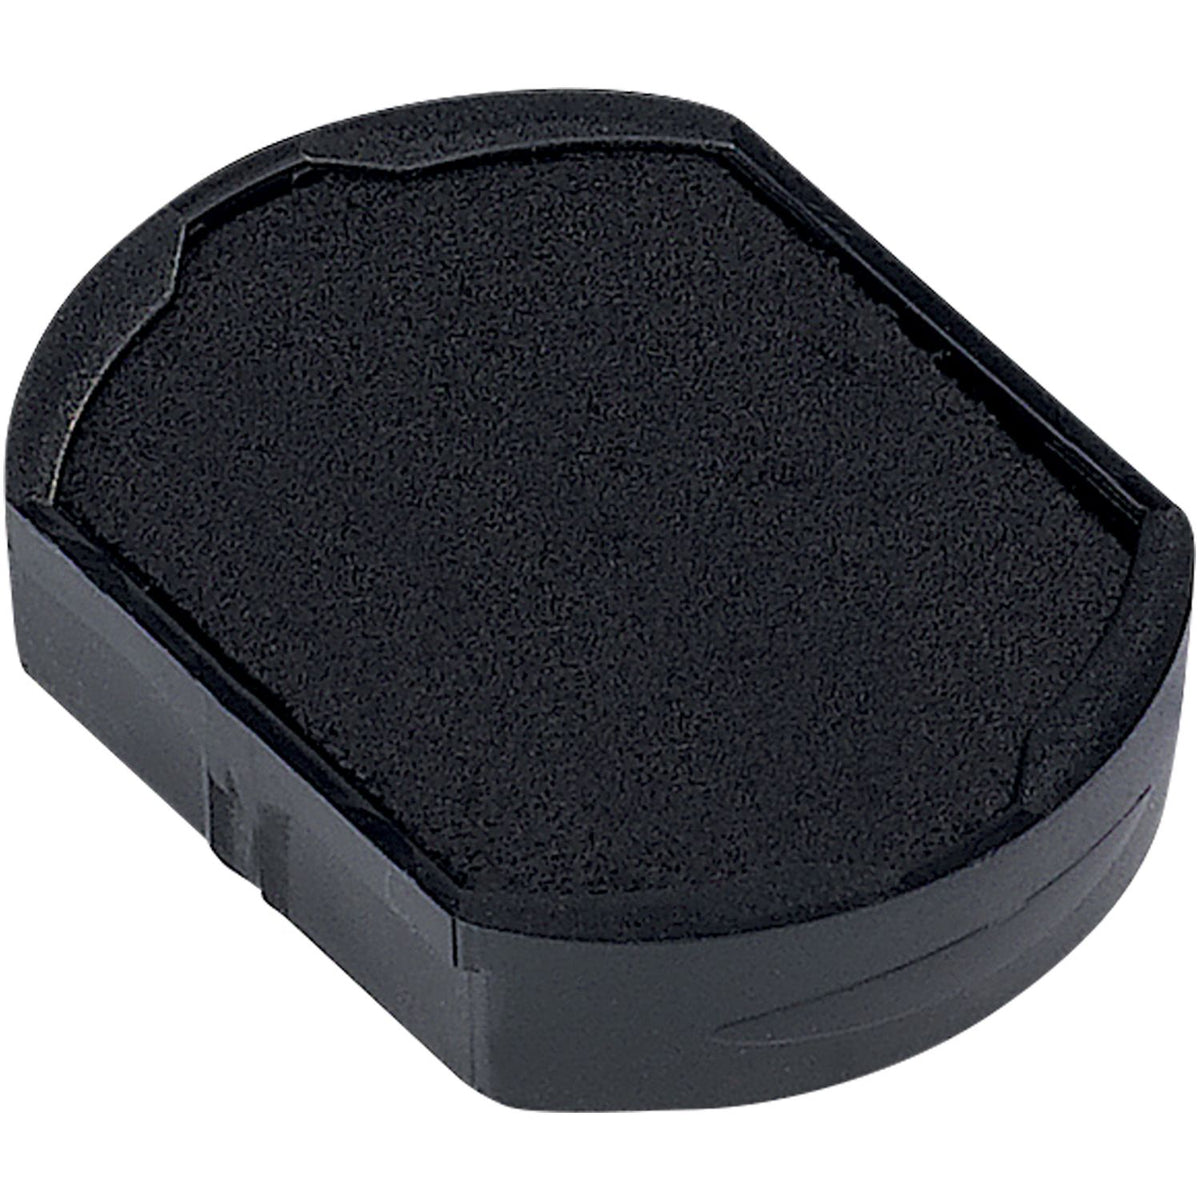 One Color Replacement Ink Pad For 4612 Trodat Black